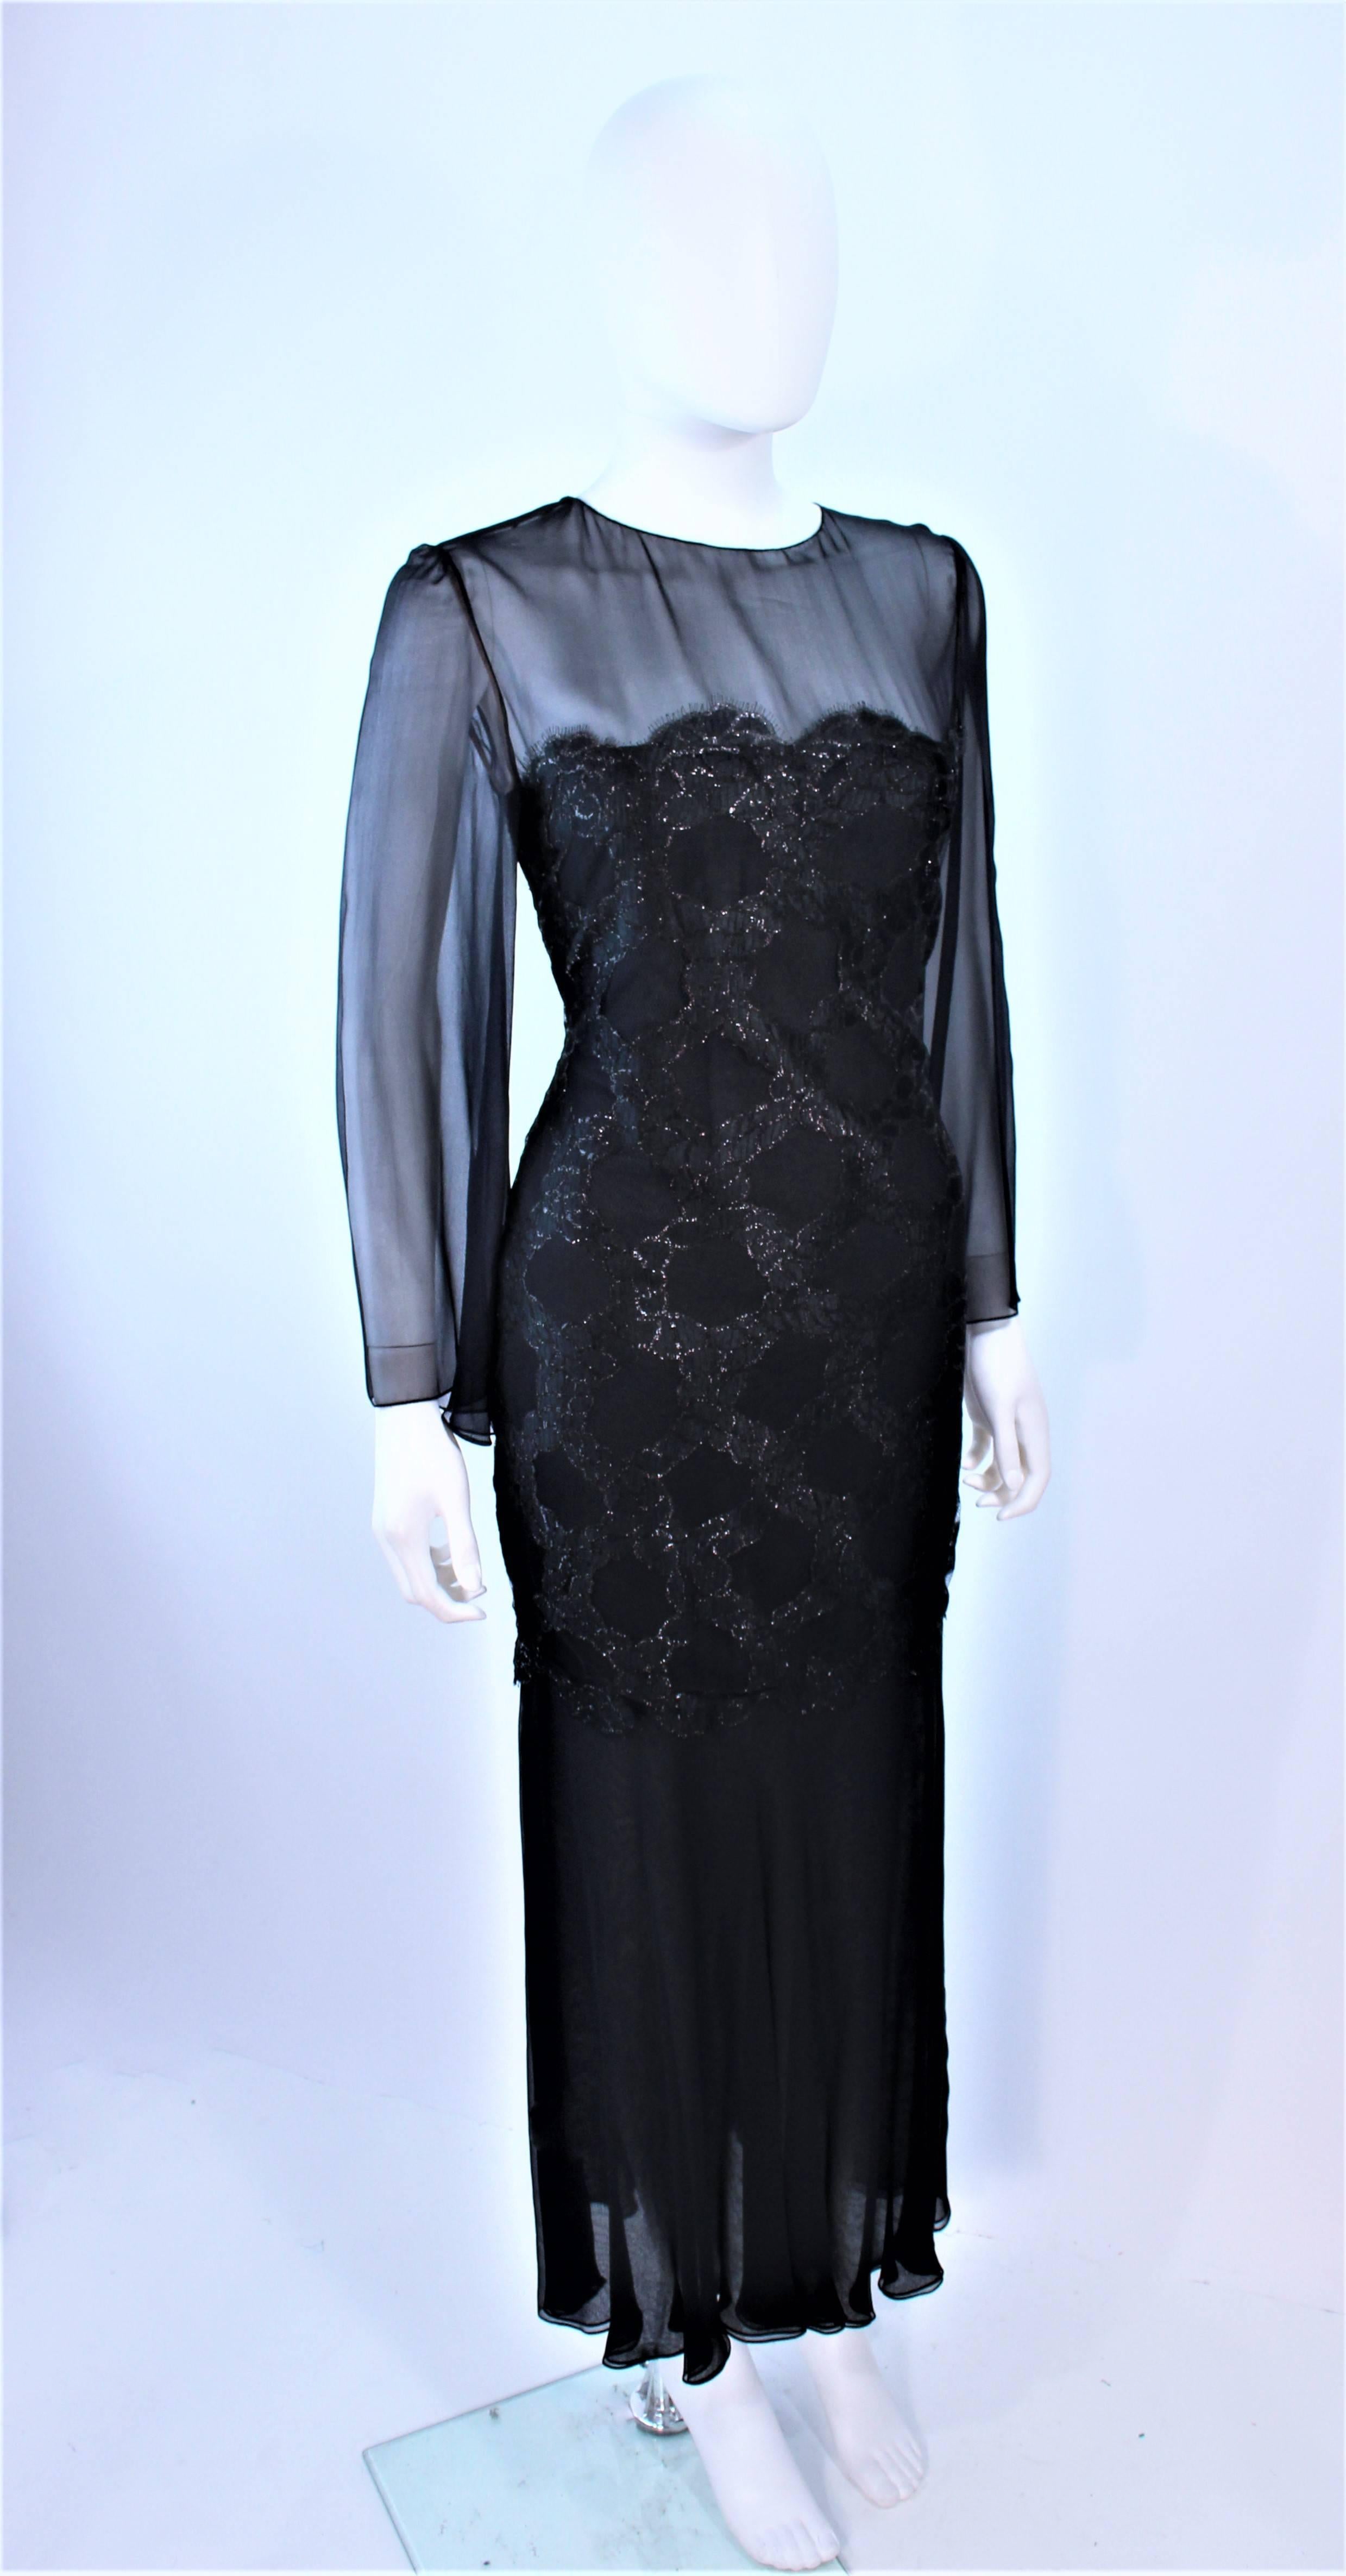 BILL BLASS Black Chiffon Gown with Gold Lame Bodice Size 12 For Sale 1